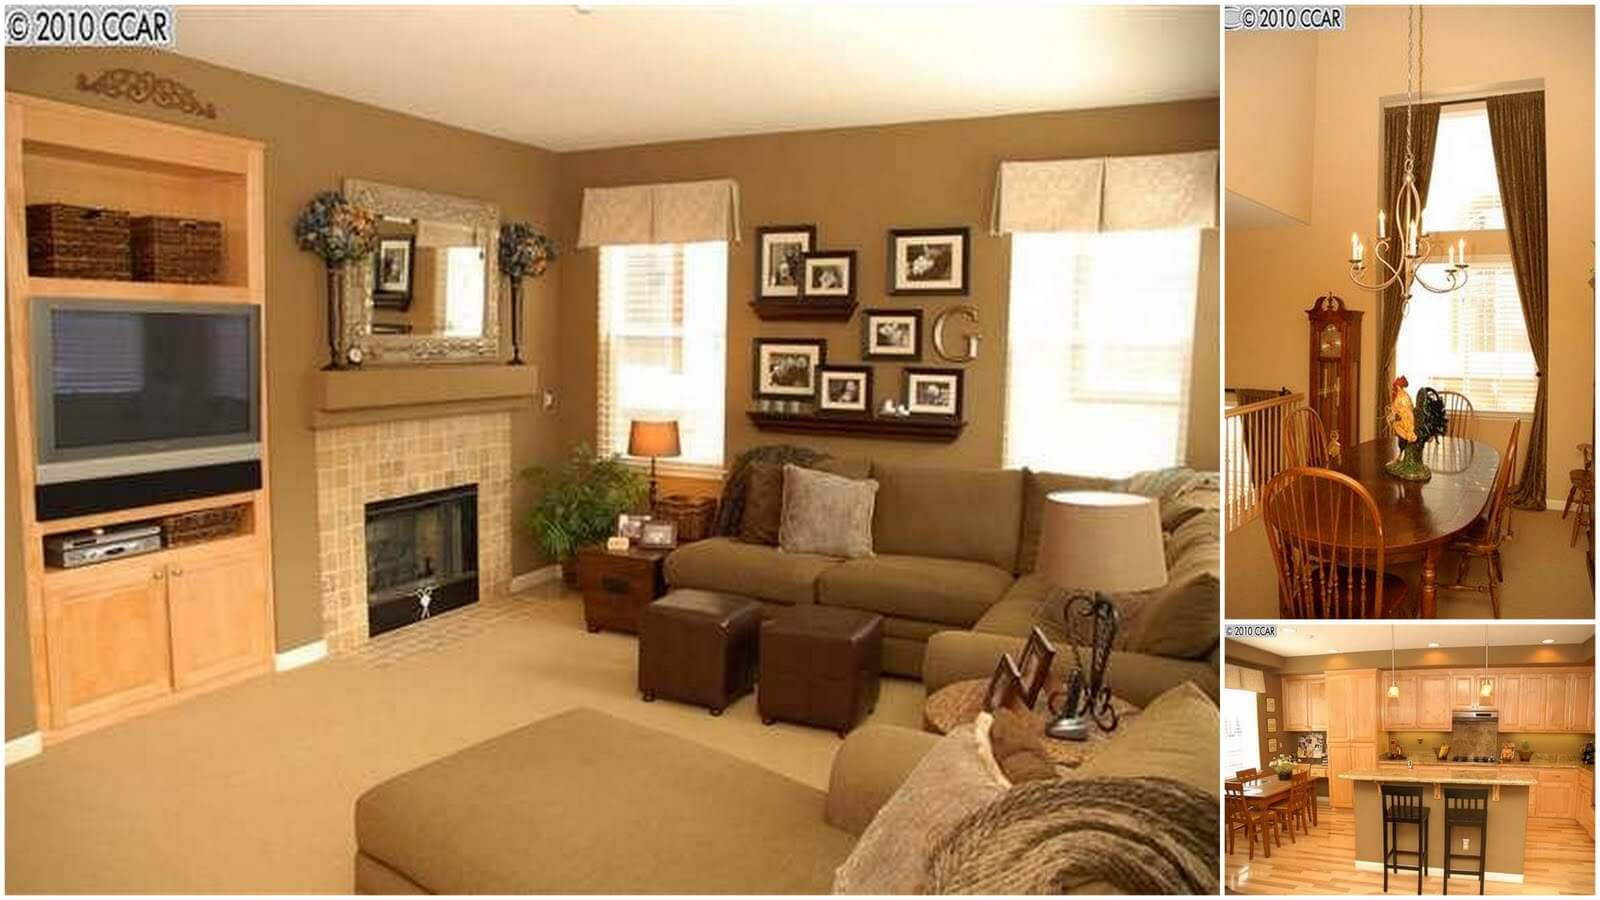 Paint Schemes For Living Room
 Warm Paint Colors for Living Room Use Interior